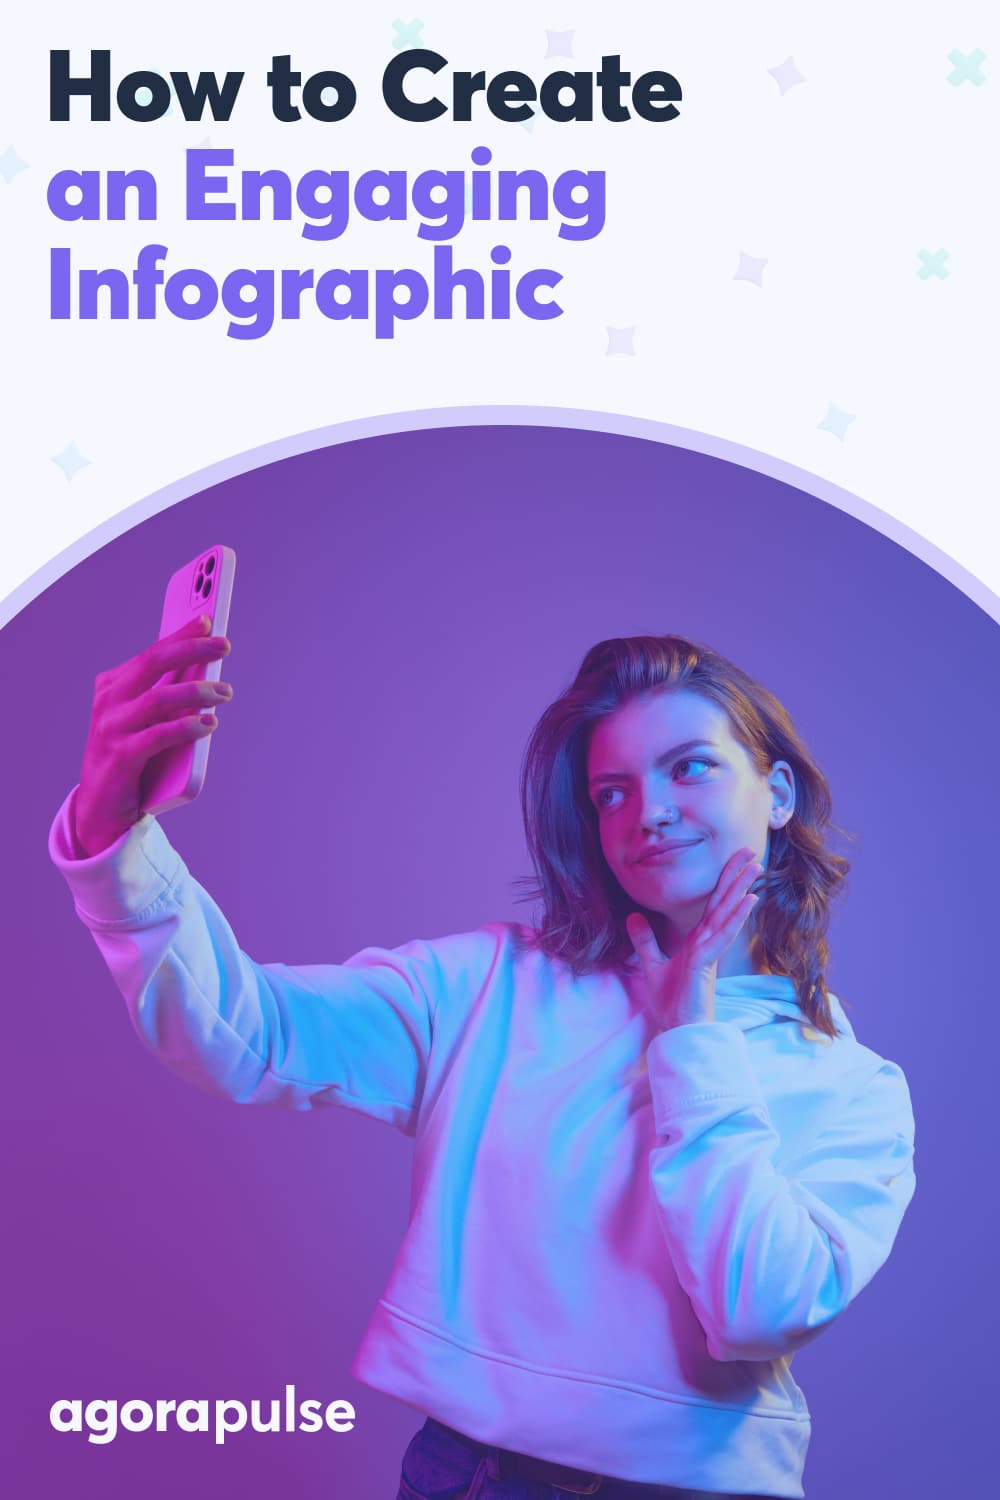 How to Make an Infographic That Encourages Engagement on Social Media